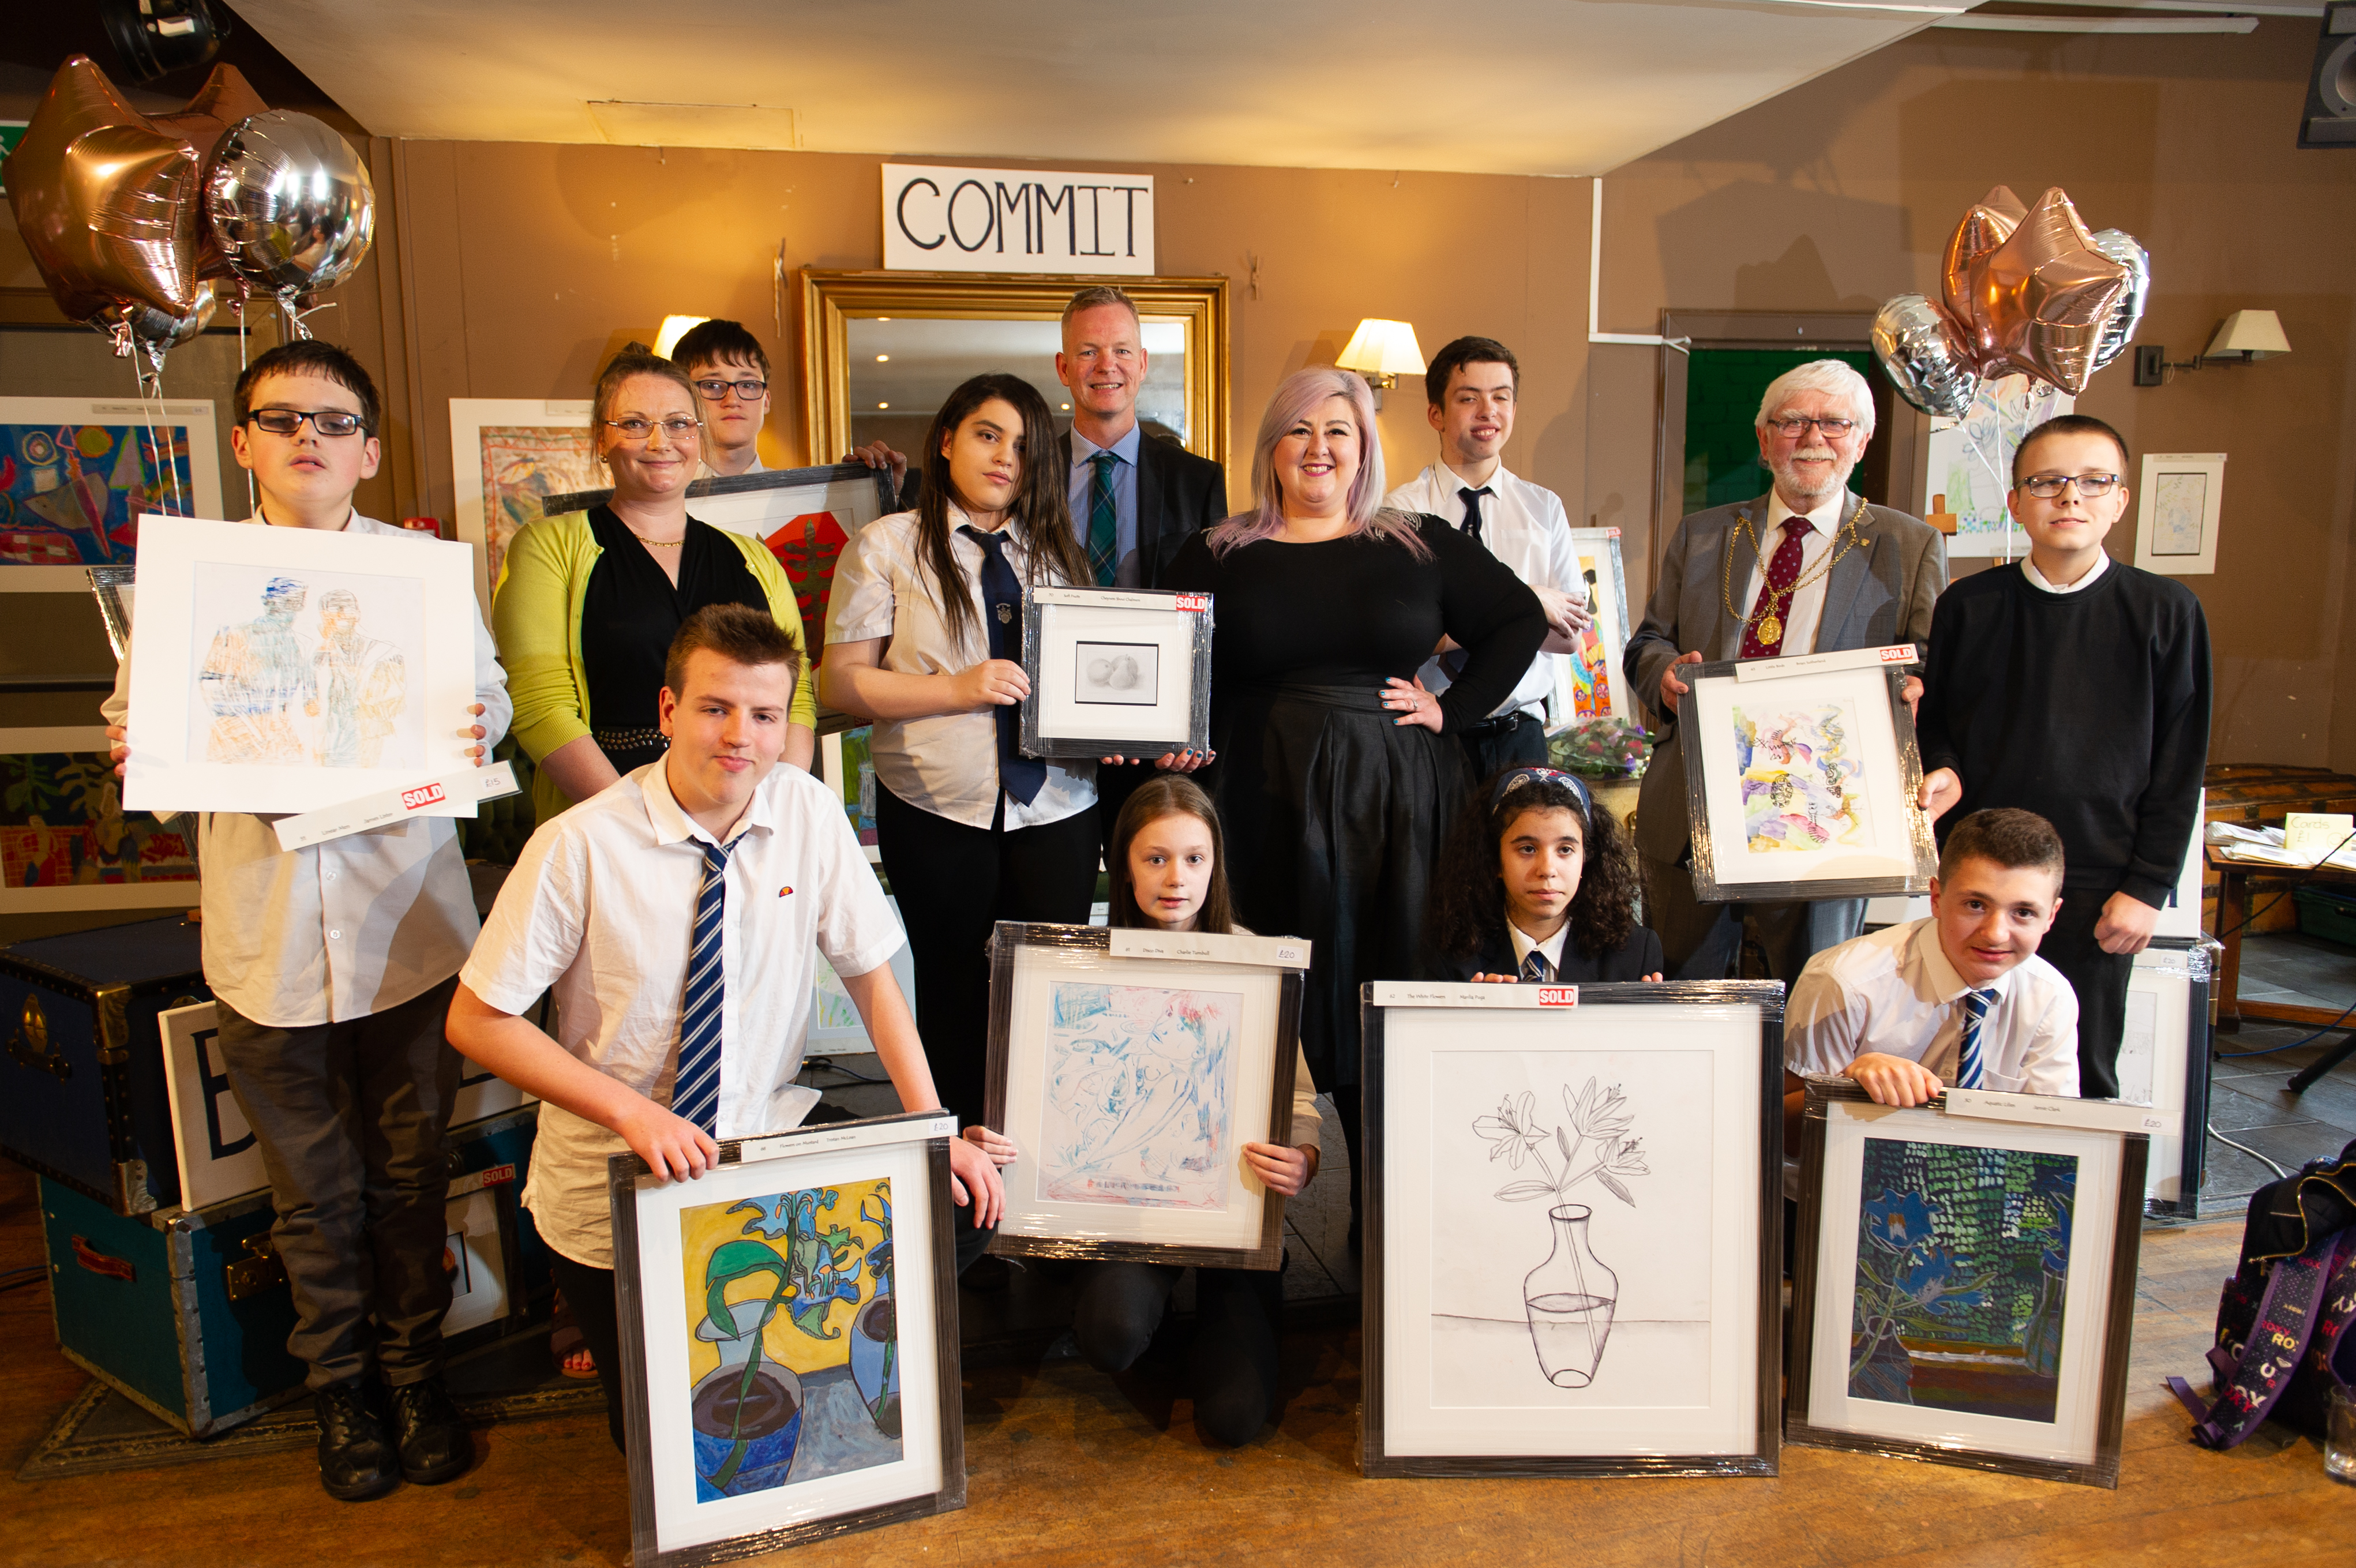 Gillian Ferriday, Perth Academy rector John Lothian, Michelle McManus and Provost Dennis Melloy, along with pupils, attended the VIP auction and exhibition launch.